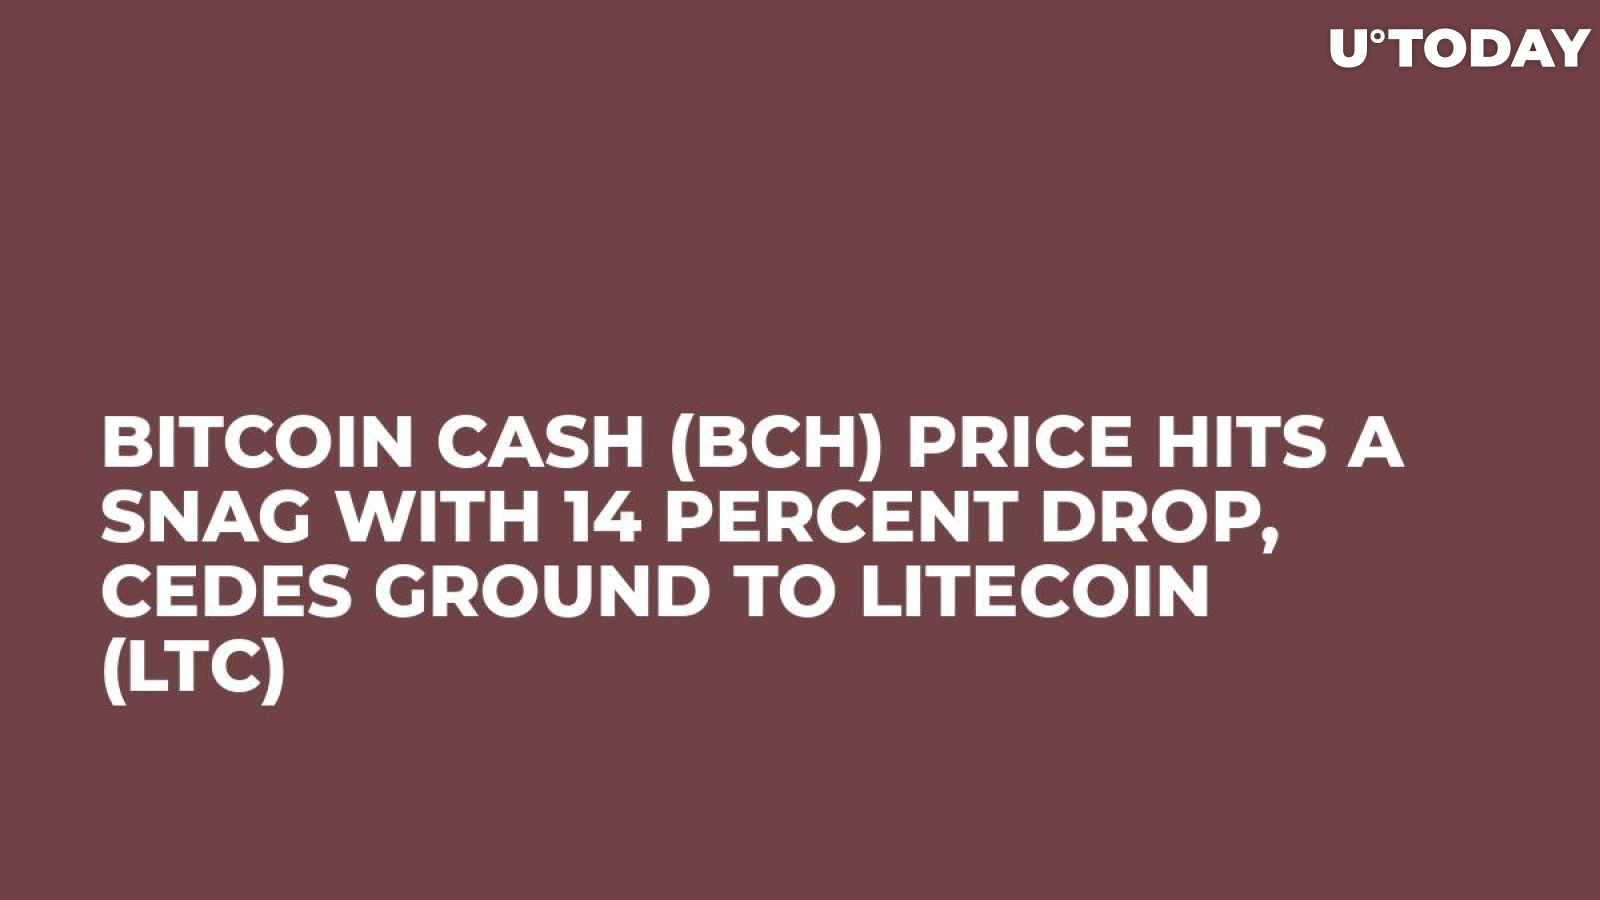 Bitcoin Cash (BCH) Price Hits a Snag with 14 Percent Drop, Cedes Ground to Litecoin (LTC) 